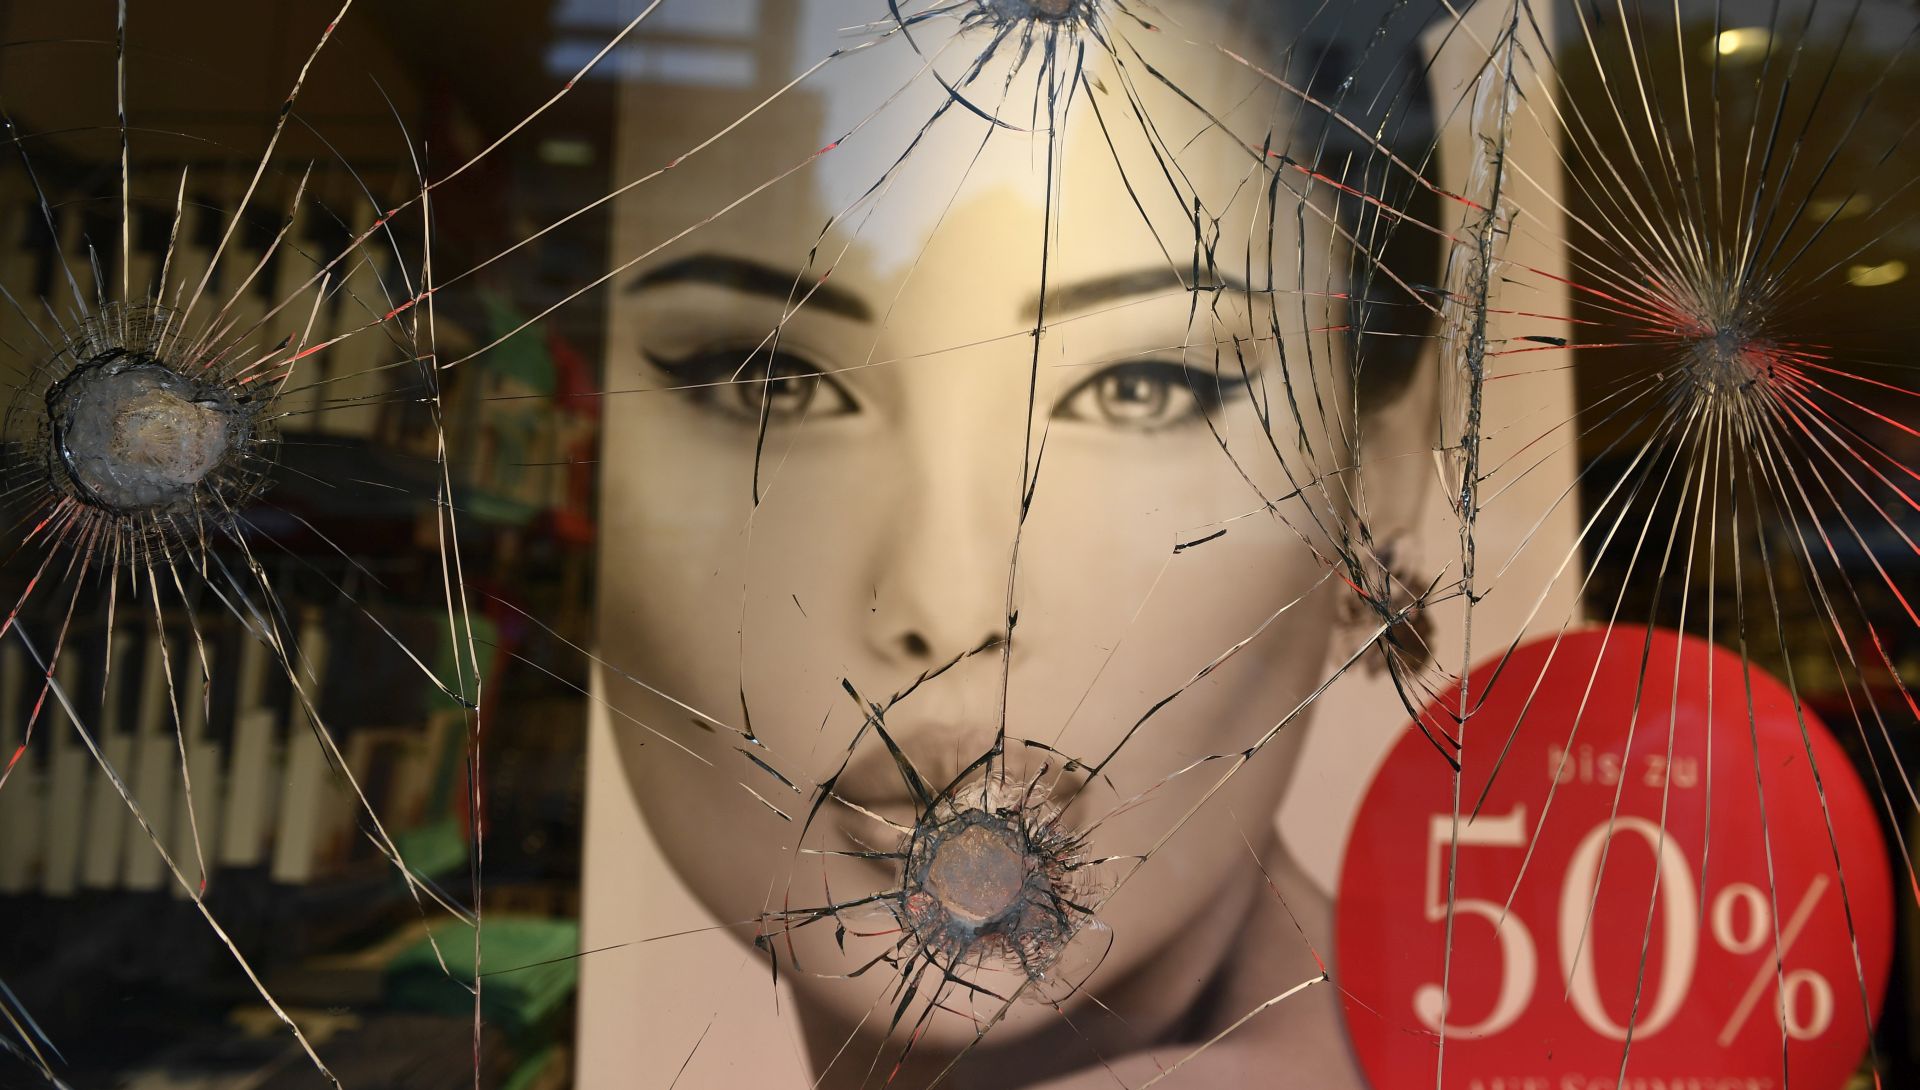 epa06071947 The display window of a fashion shop is severely damaged during the G20 summit in Hamburg, Germany, 07 July 2017. The G20 Summit (or G-20 or Group of Twenty) is an international forum for governments from 20 major economies. The summit is taking place in Hamburg from 07 to 08 July 2017.  EPA/FILIP SINGER